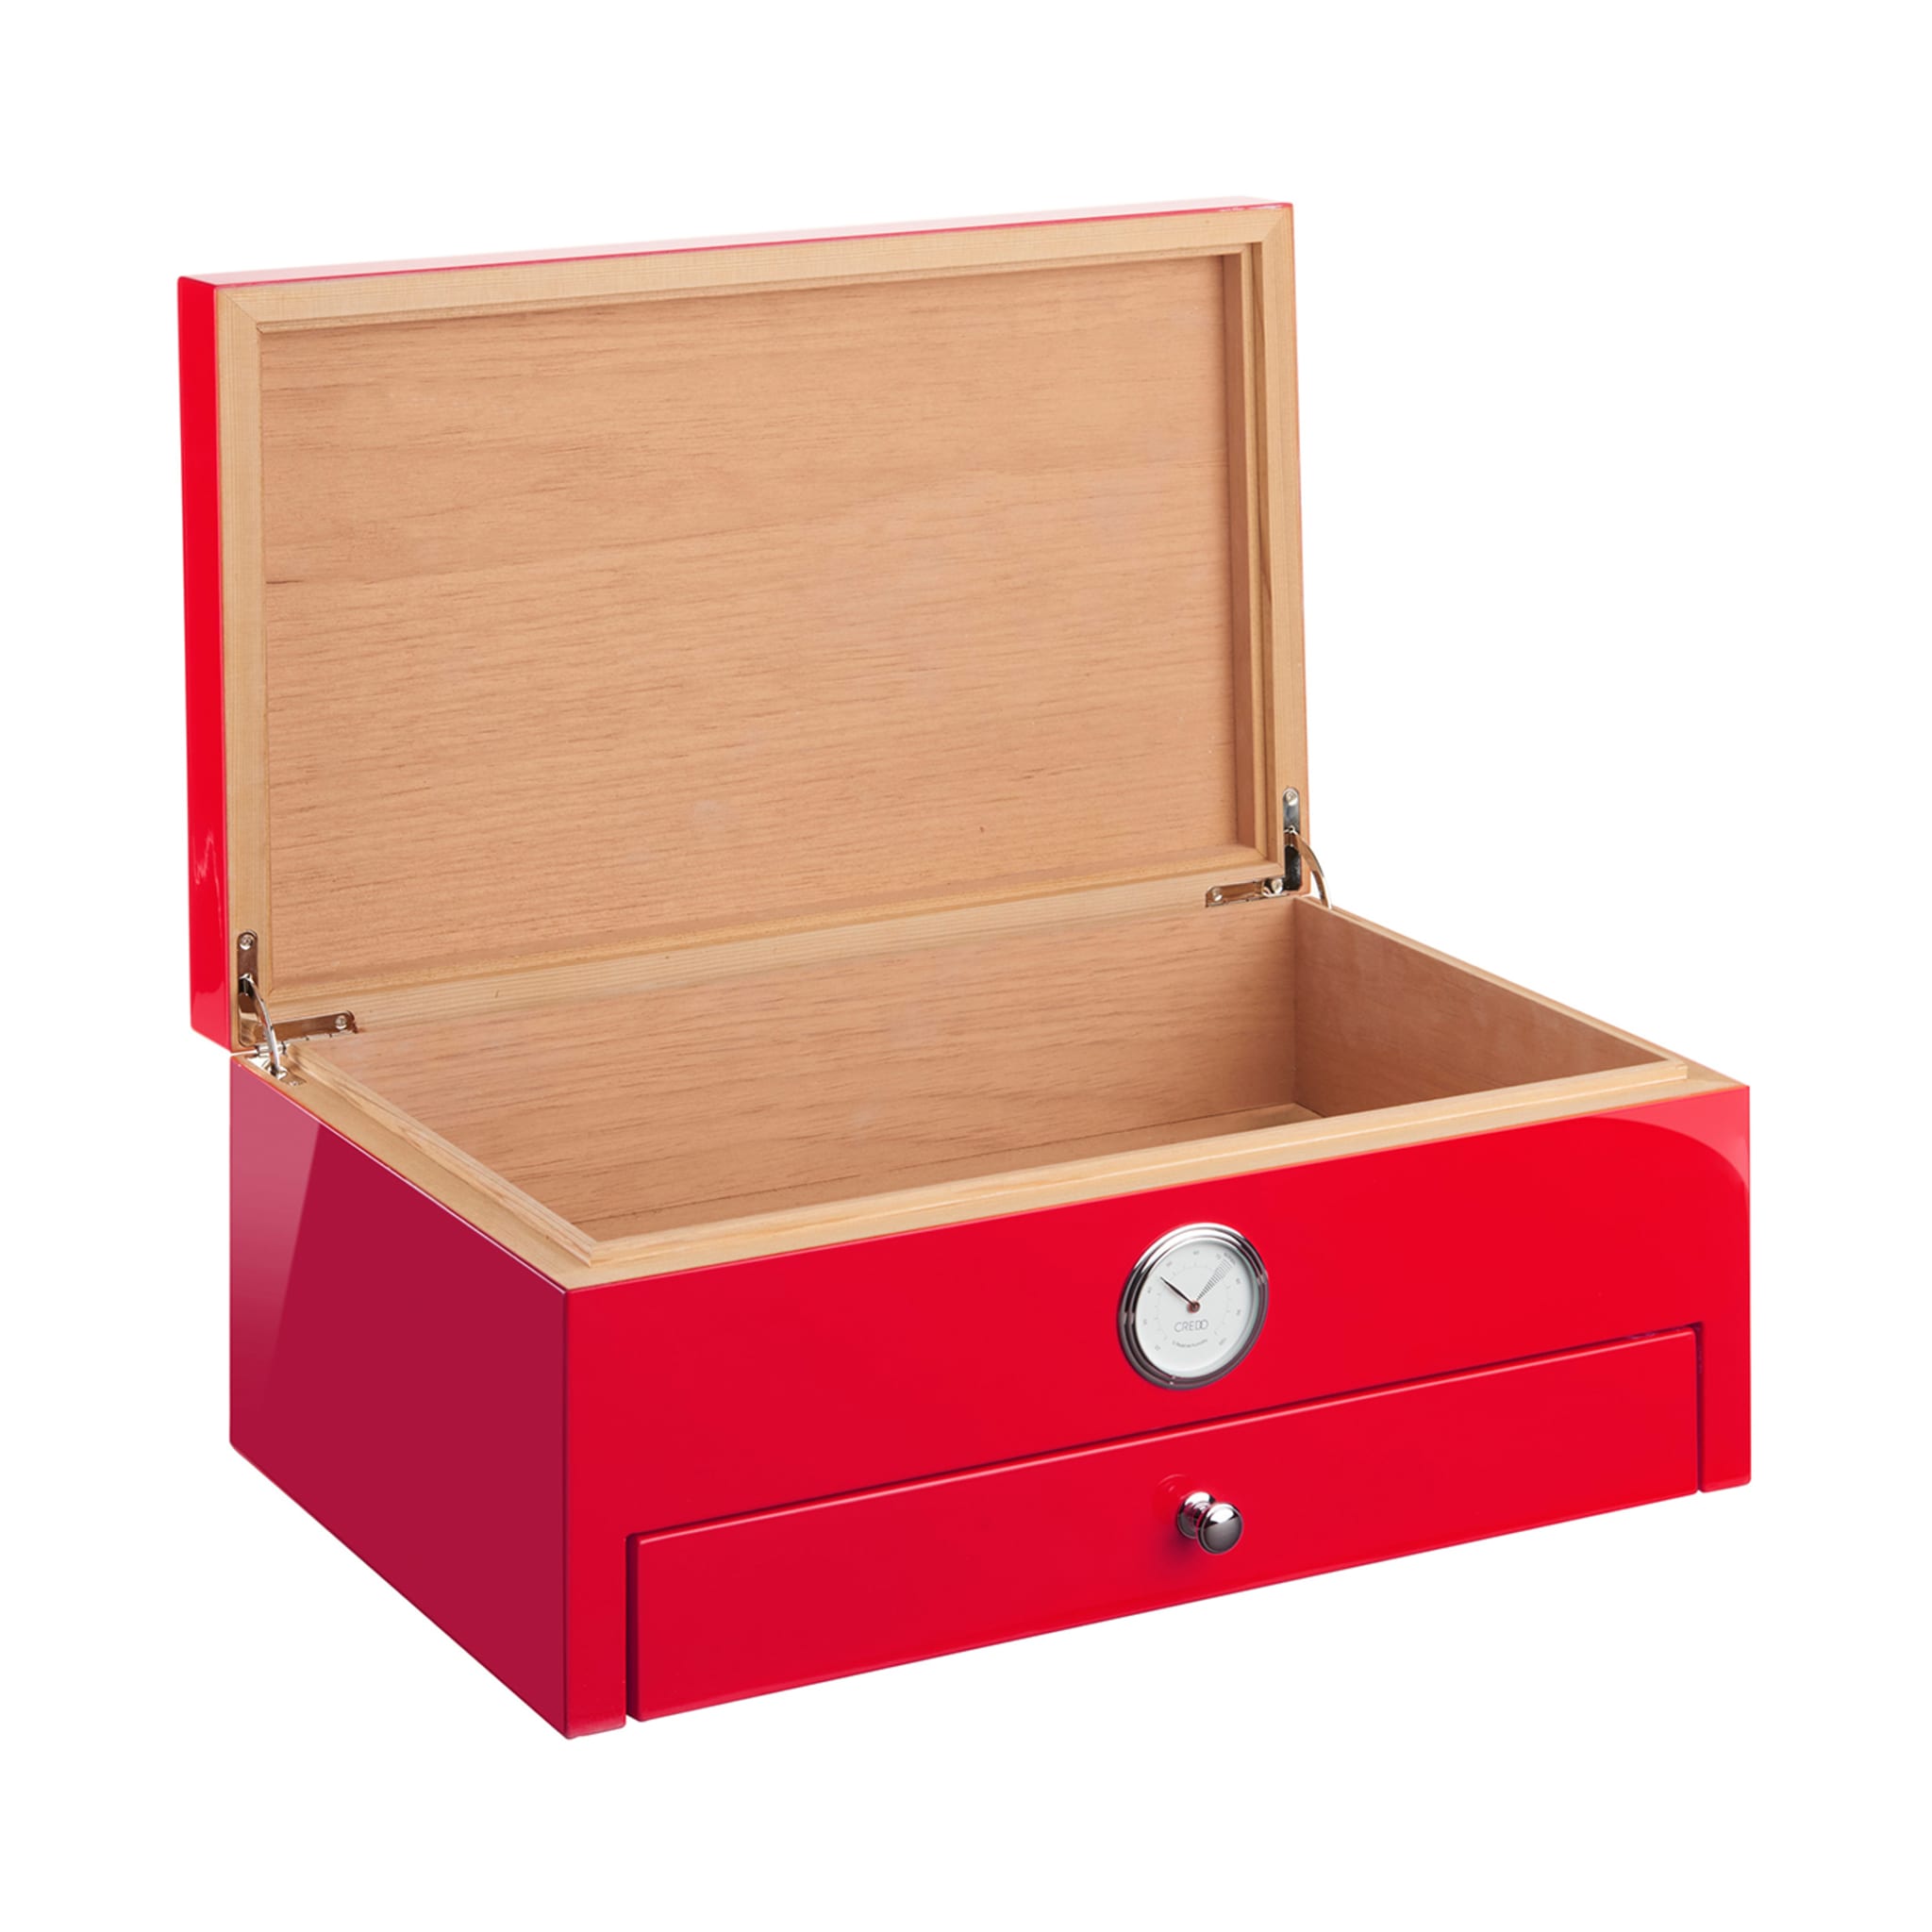 Full Color Red Humidor (Special Club Edition) - Alternative view 1